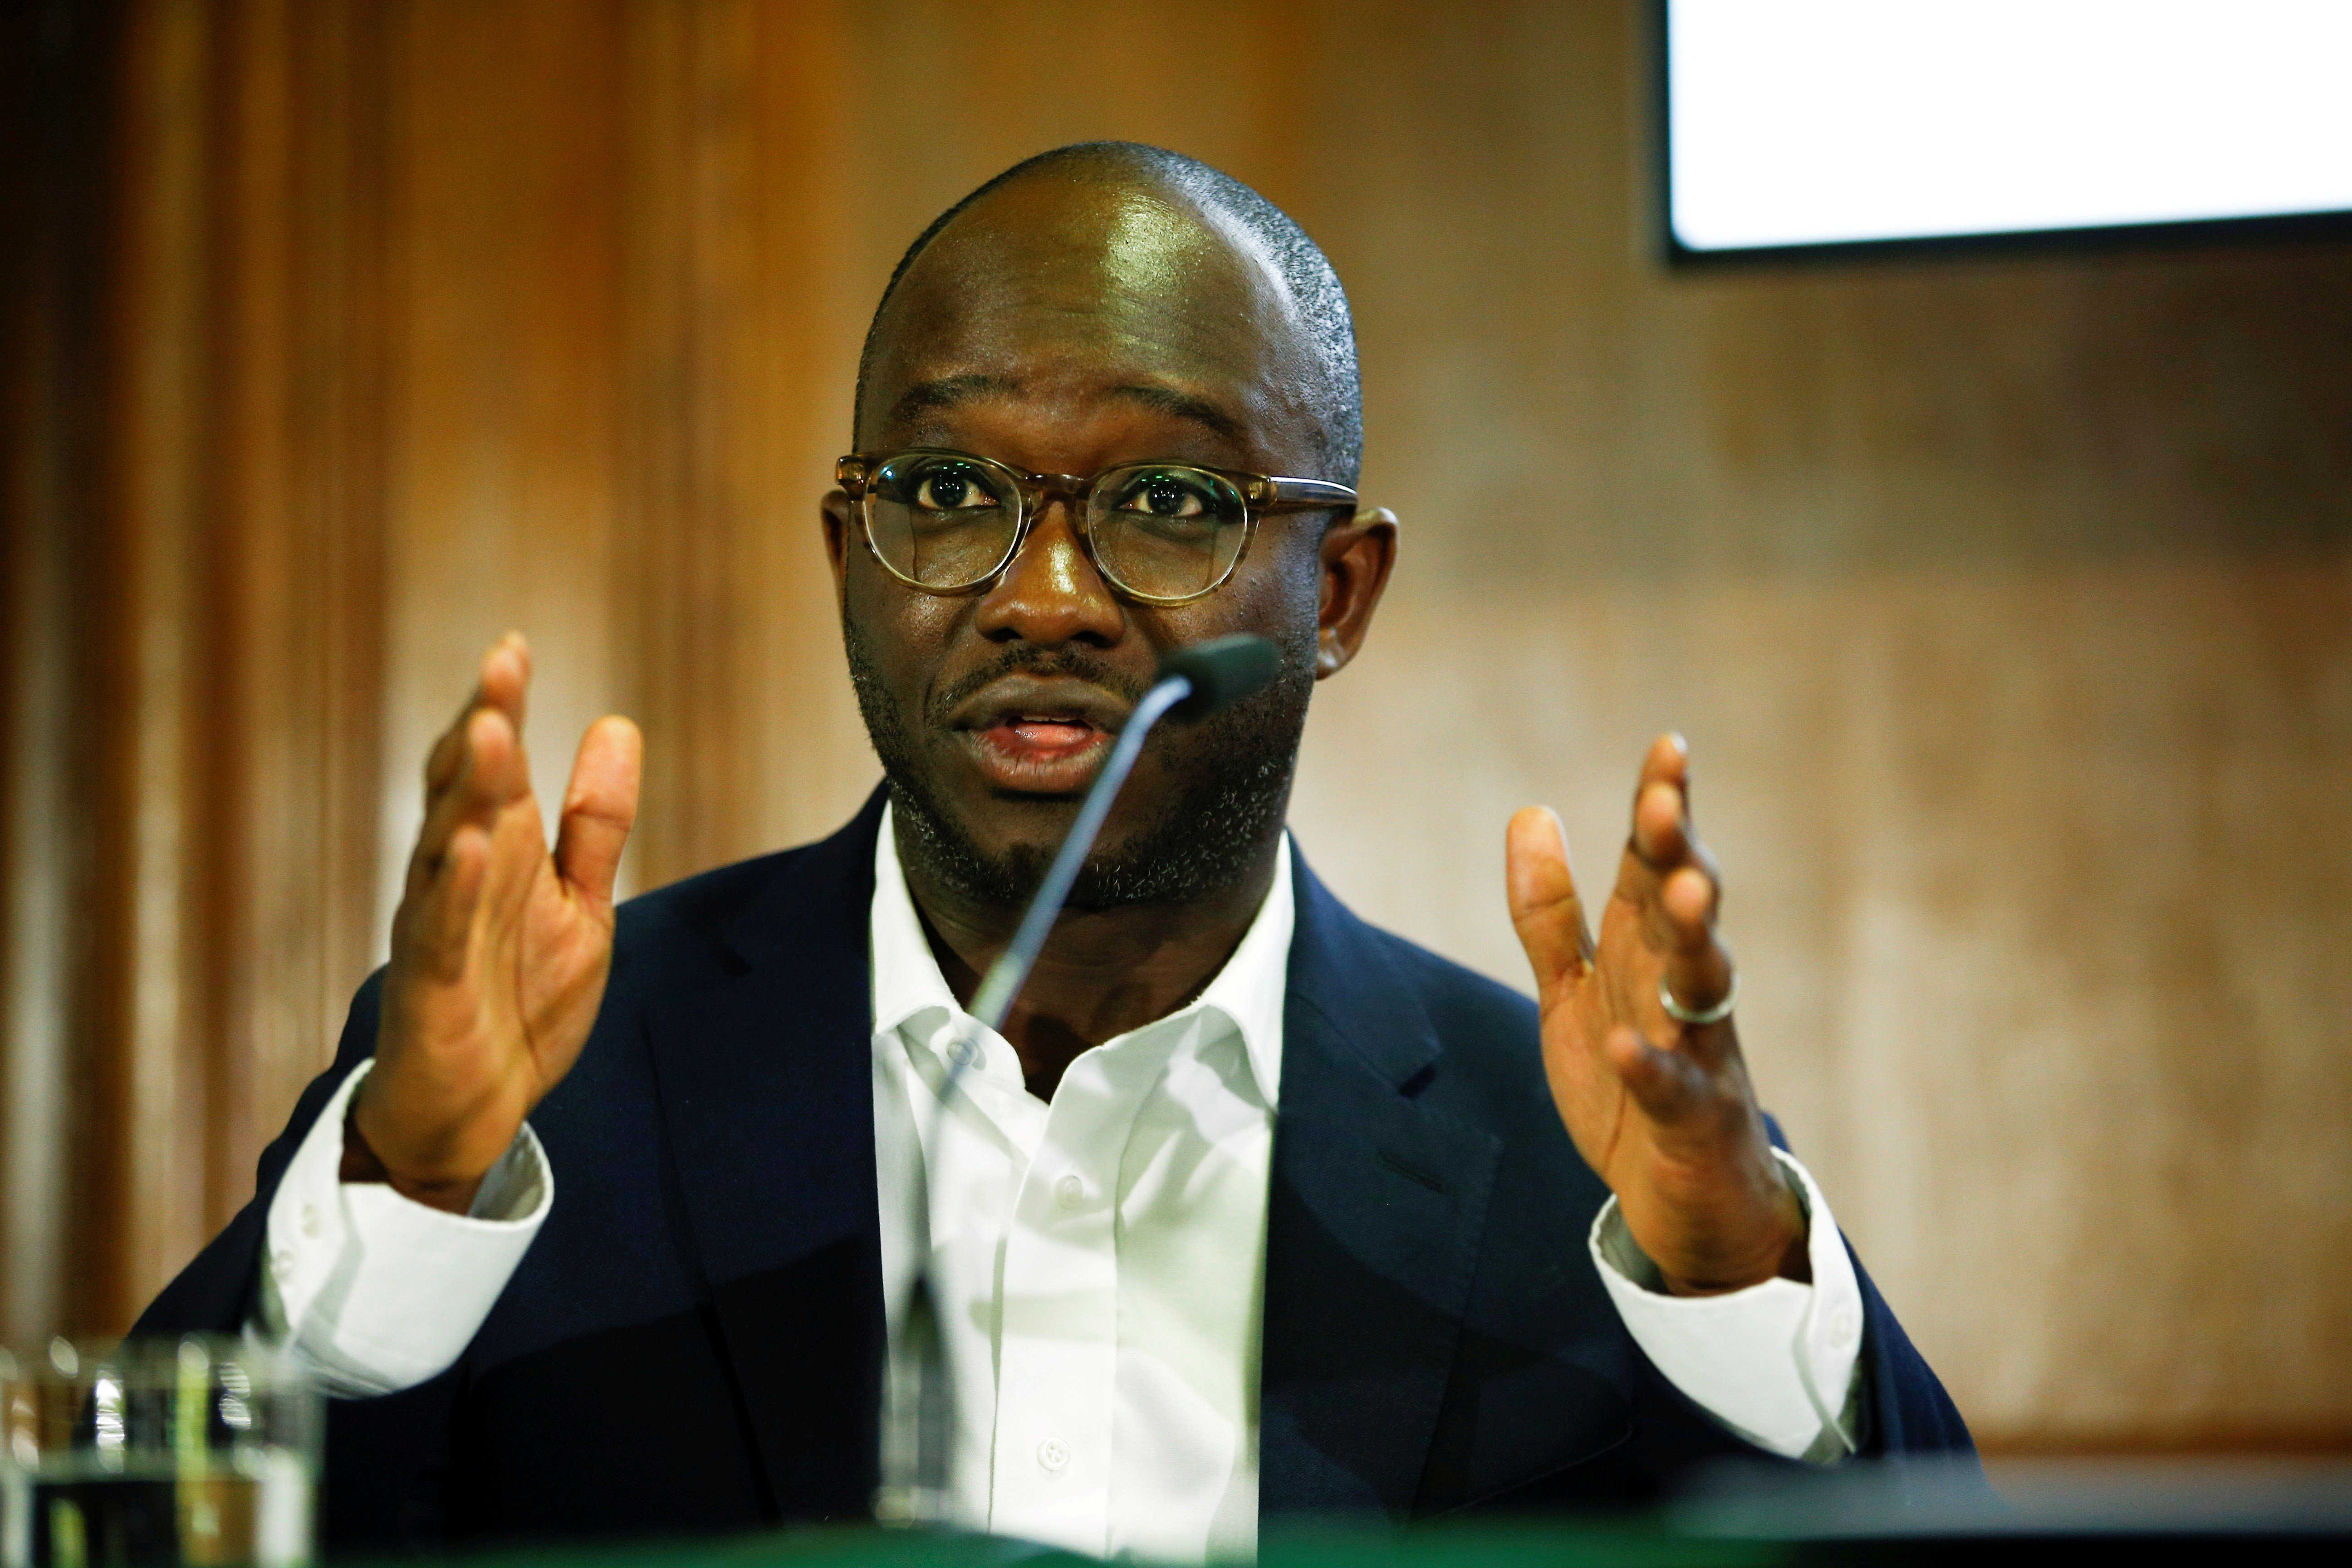 Sam Gyimah speaks during a People’s Vote press conference at the National Institute of Economic and Social Research in London. Photo: Reuters